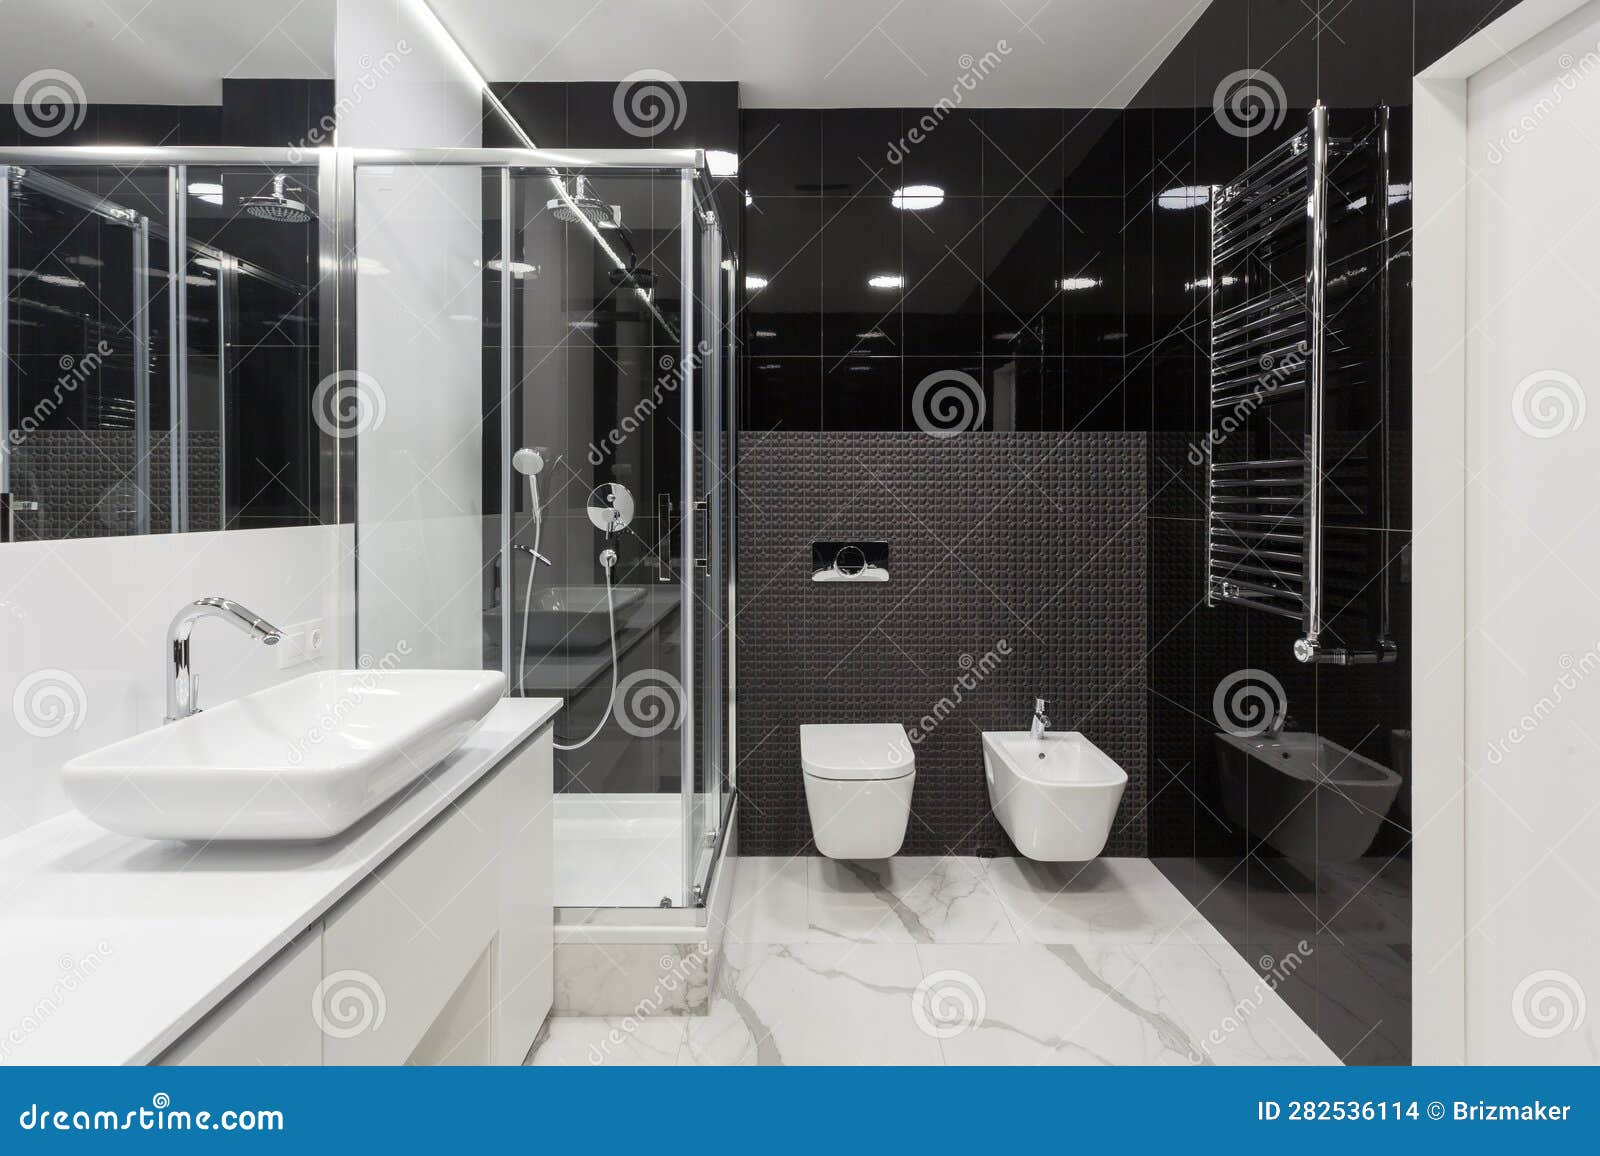 spacious restroom with washbowl, shower cabin and bide